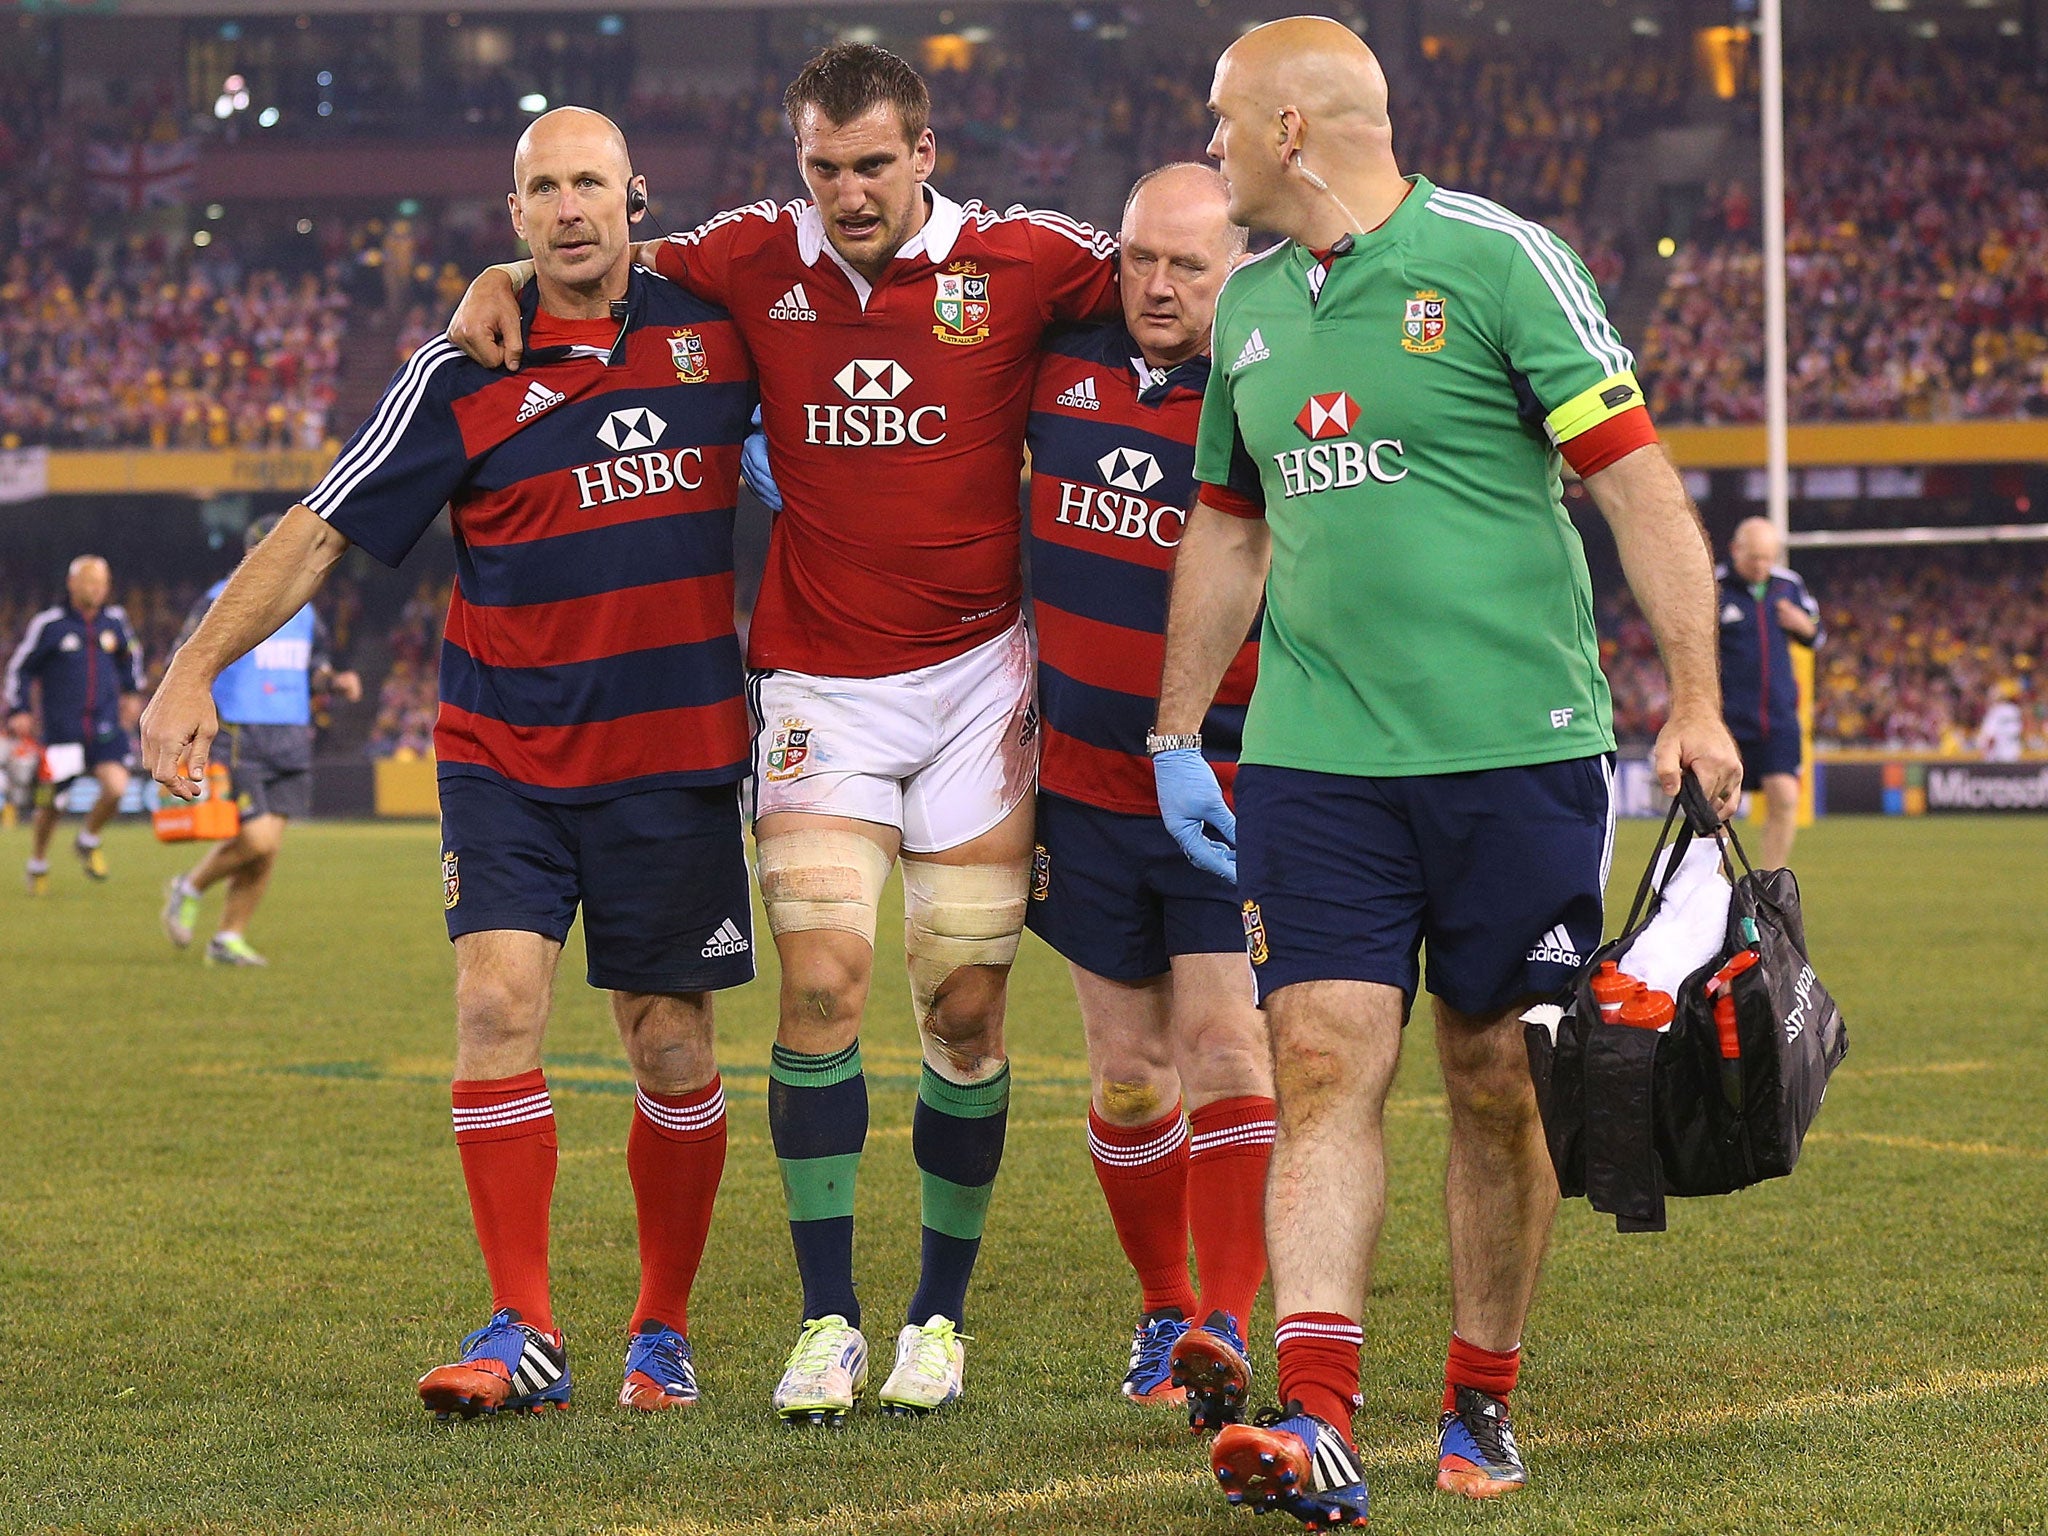 Sam Warburton was the player who caused the Wallabies so much grief at the breakdown in the second Test in Melbourne